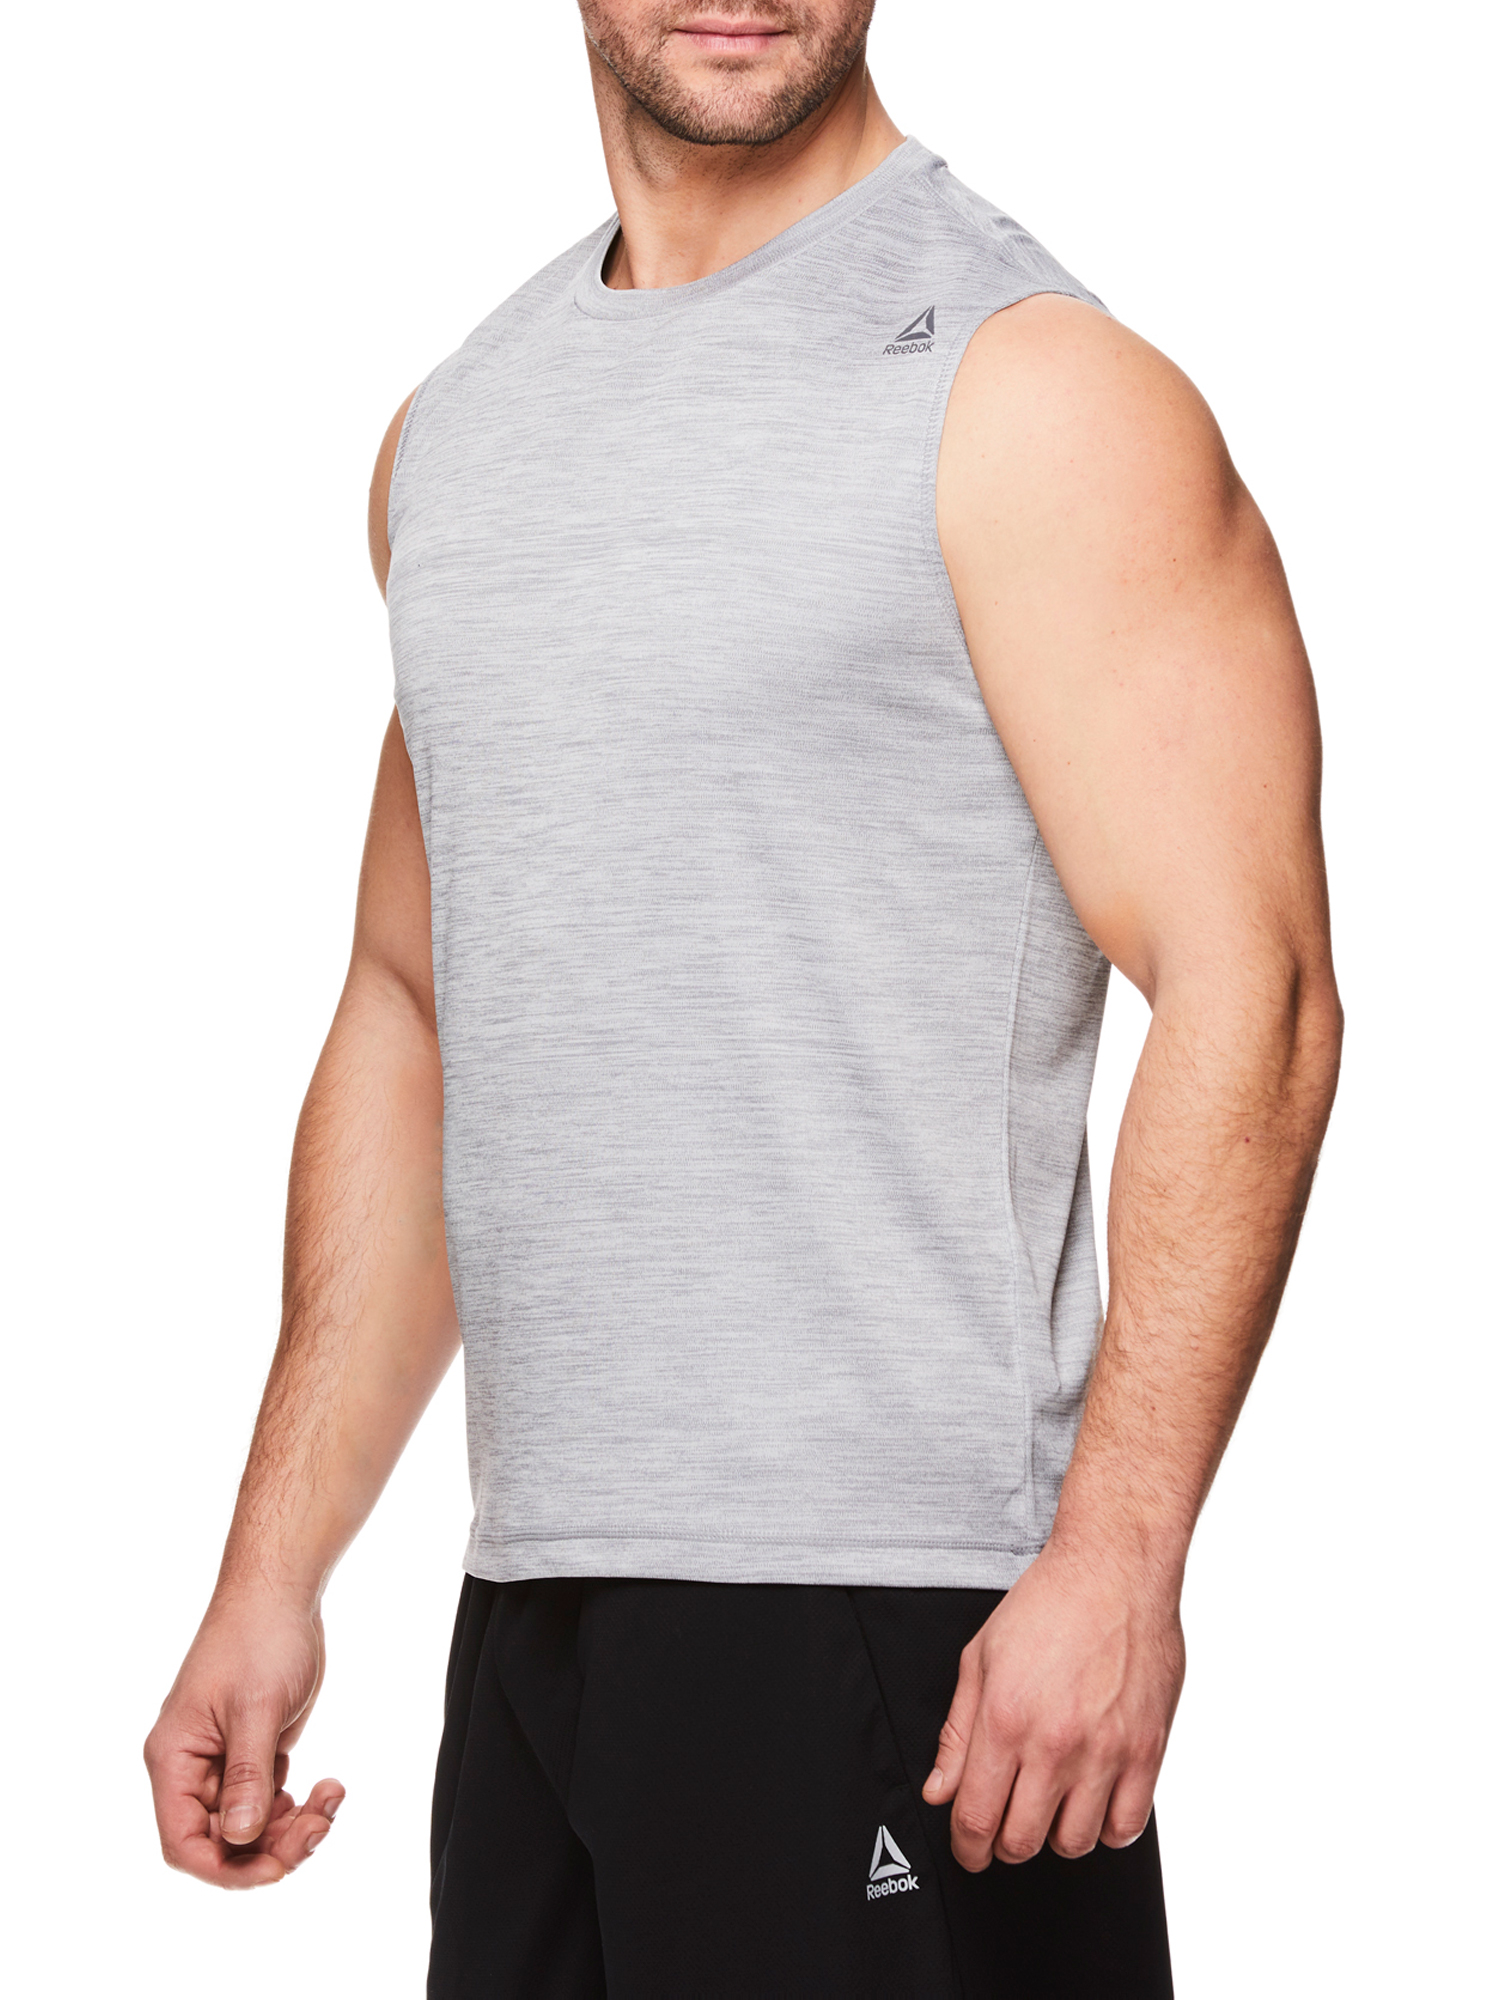 Reebok Men's Charger Muscle Tank Top - image 4 of 4